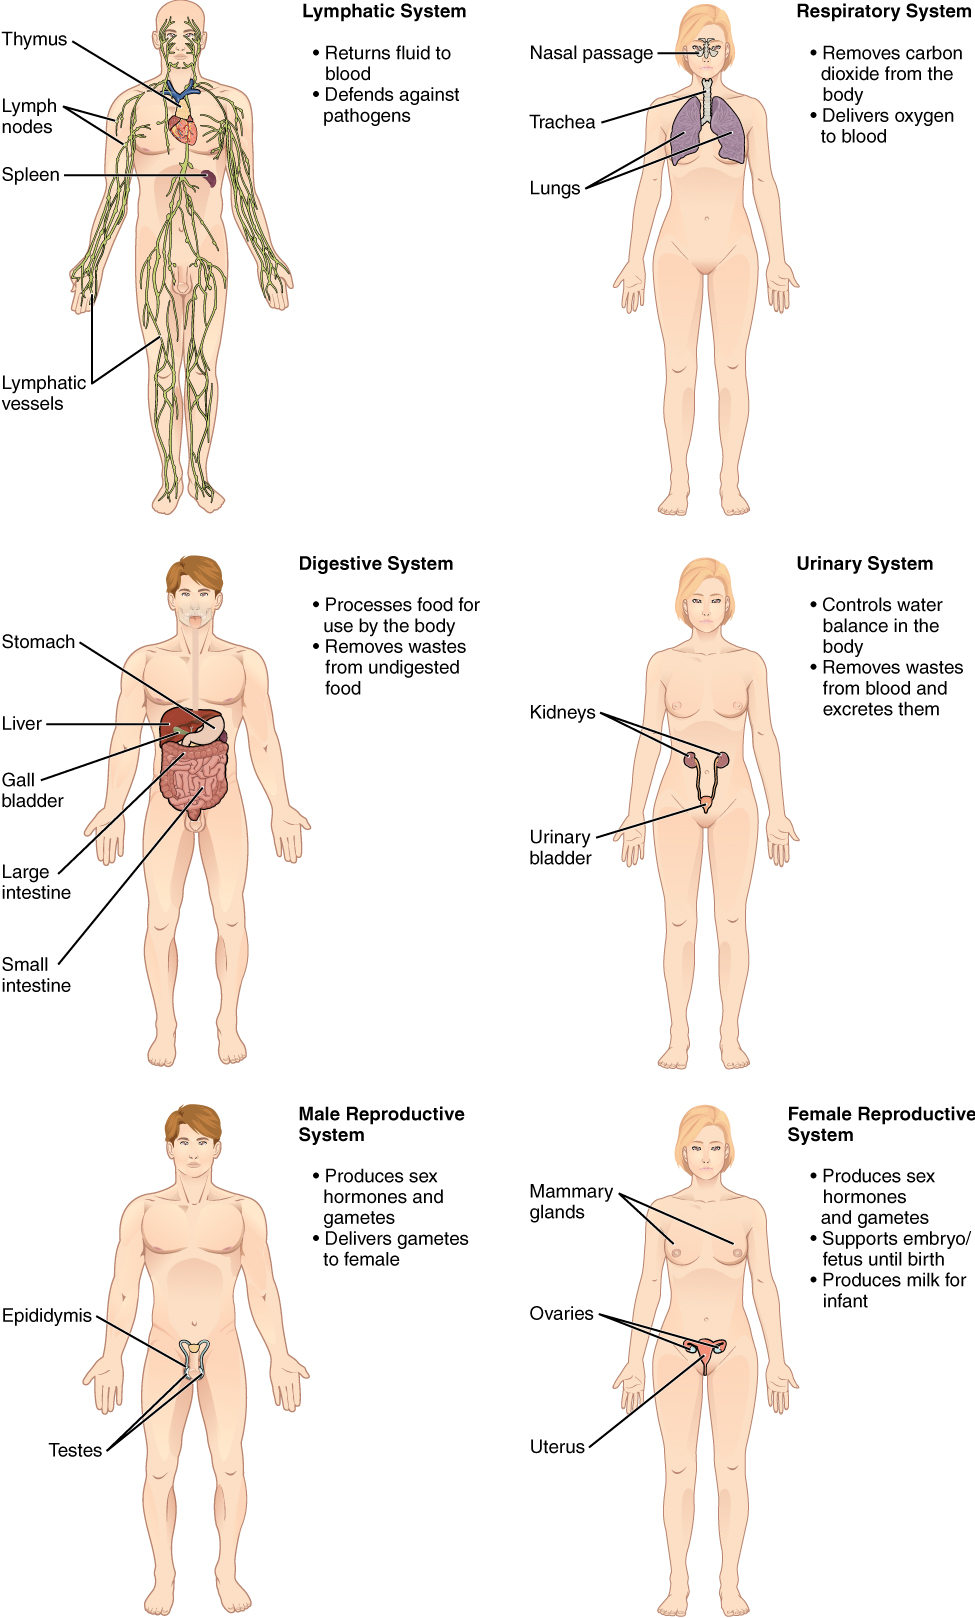 Structural Organization of the Human Body · Anatomy and ...